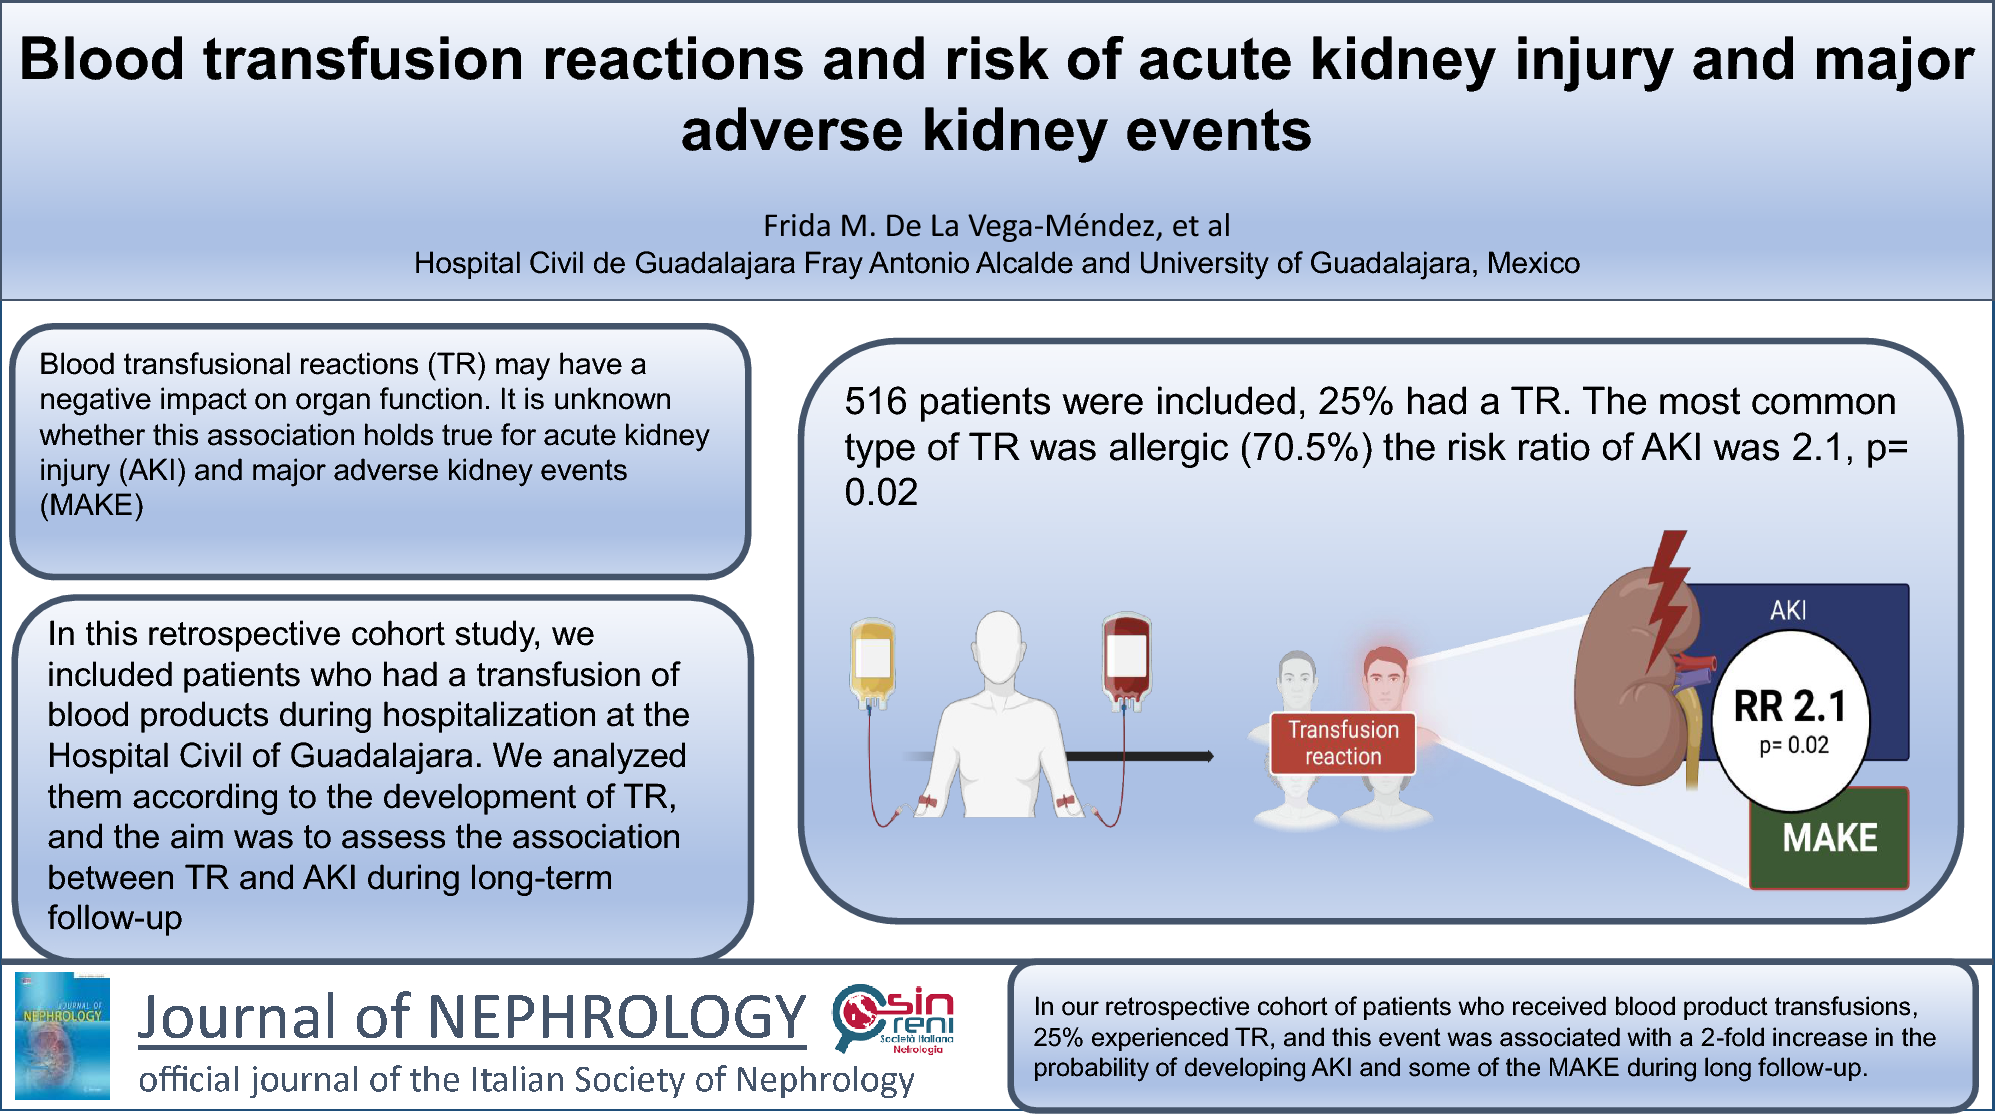 Blood transfusion reactions and risk of acute kidney injury and major adverse kidney events